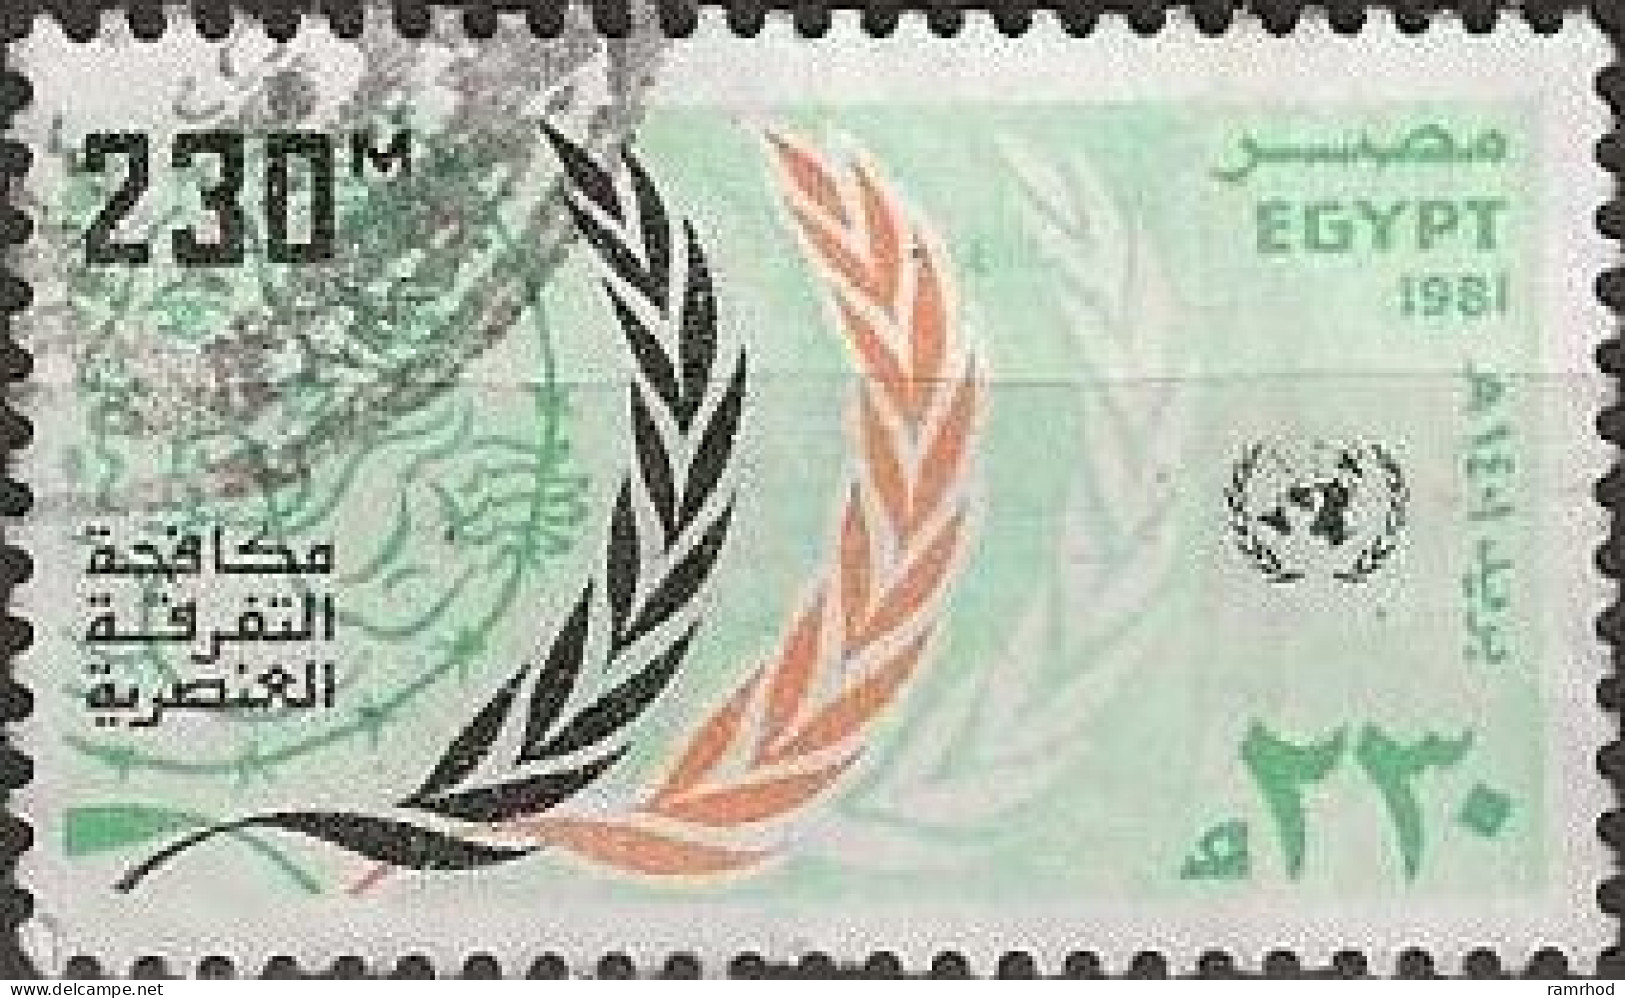 EGYPT 1981 United Nations Day - 230m. Olive Branches (Racial Discrimination Day) FU - Gebruikt